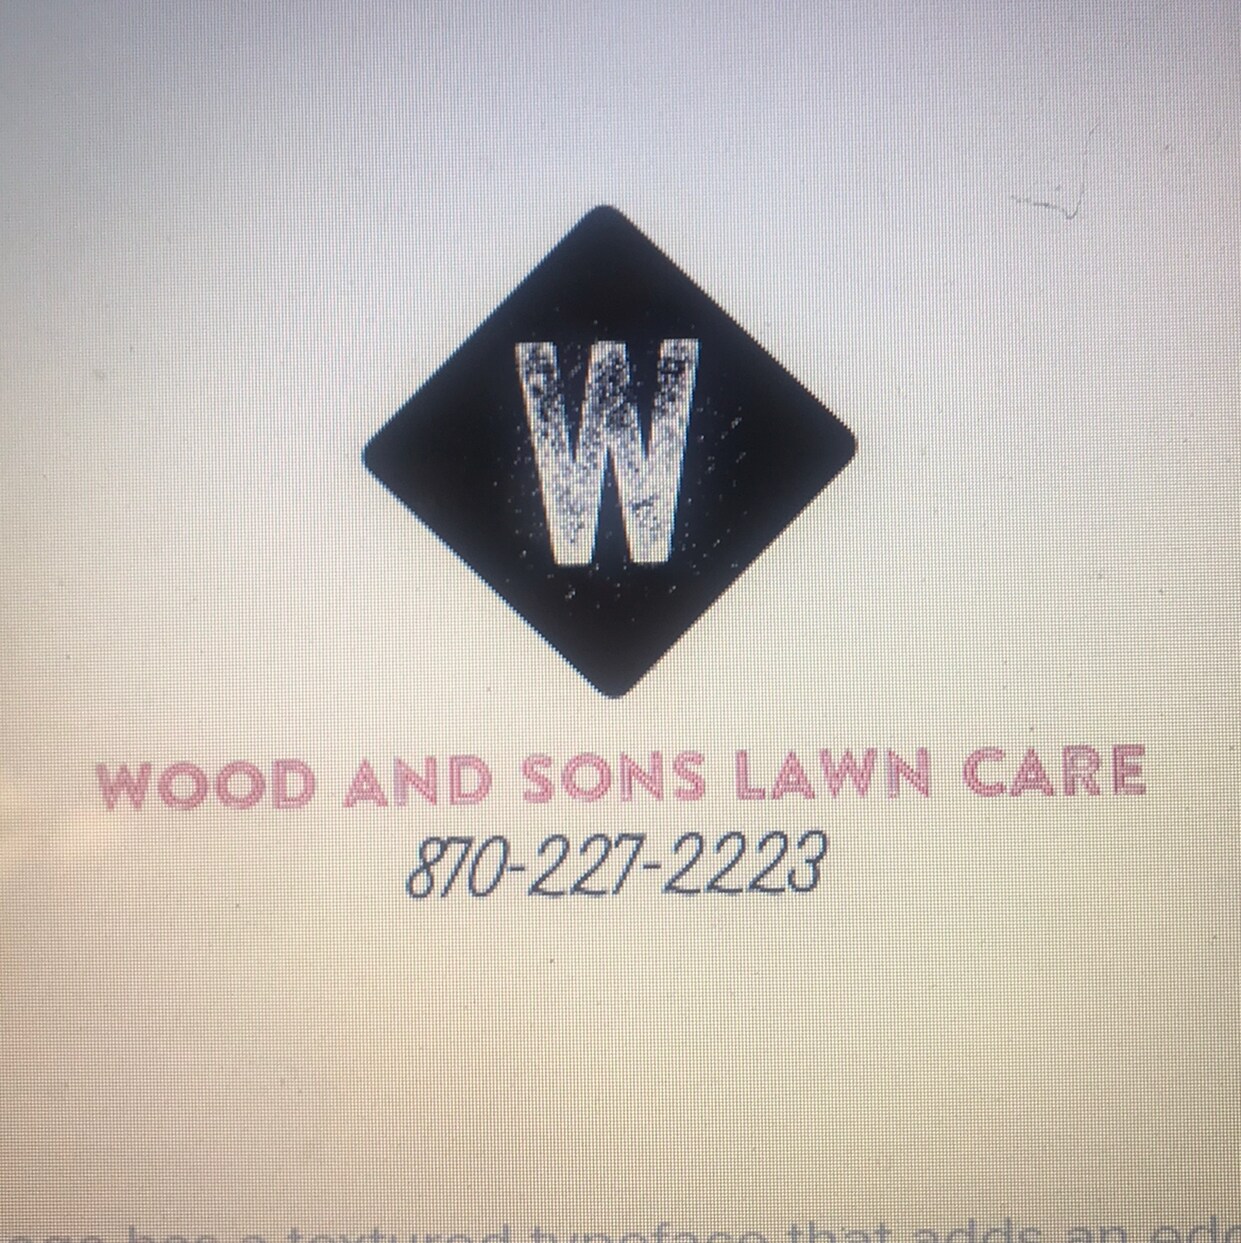 Profile Image of Pro wood and sons lawncare